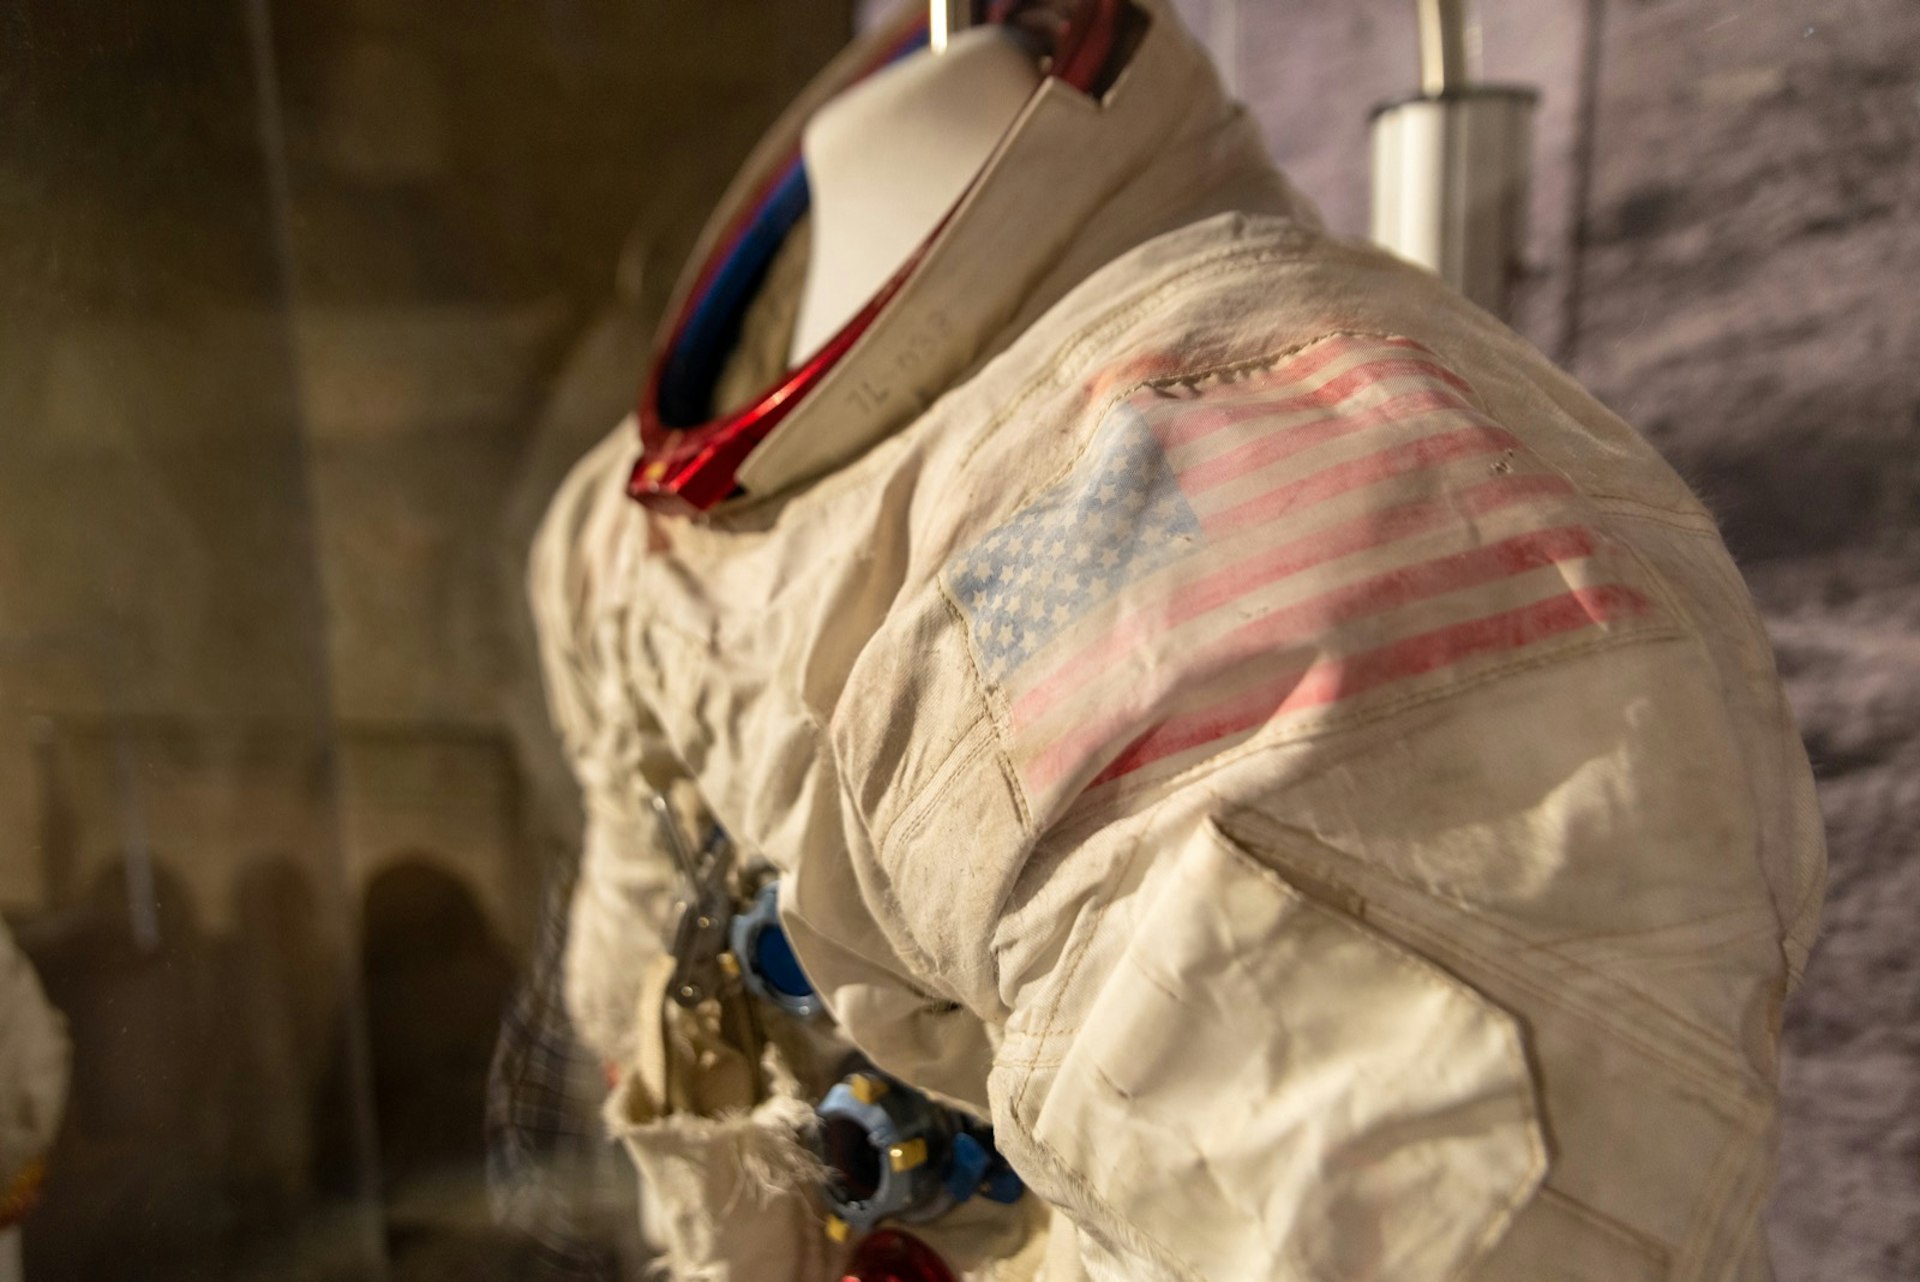 A closeup of an Apollo-era spacesuit, there's a faded American flag emblem on the left shoulder